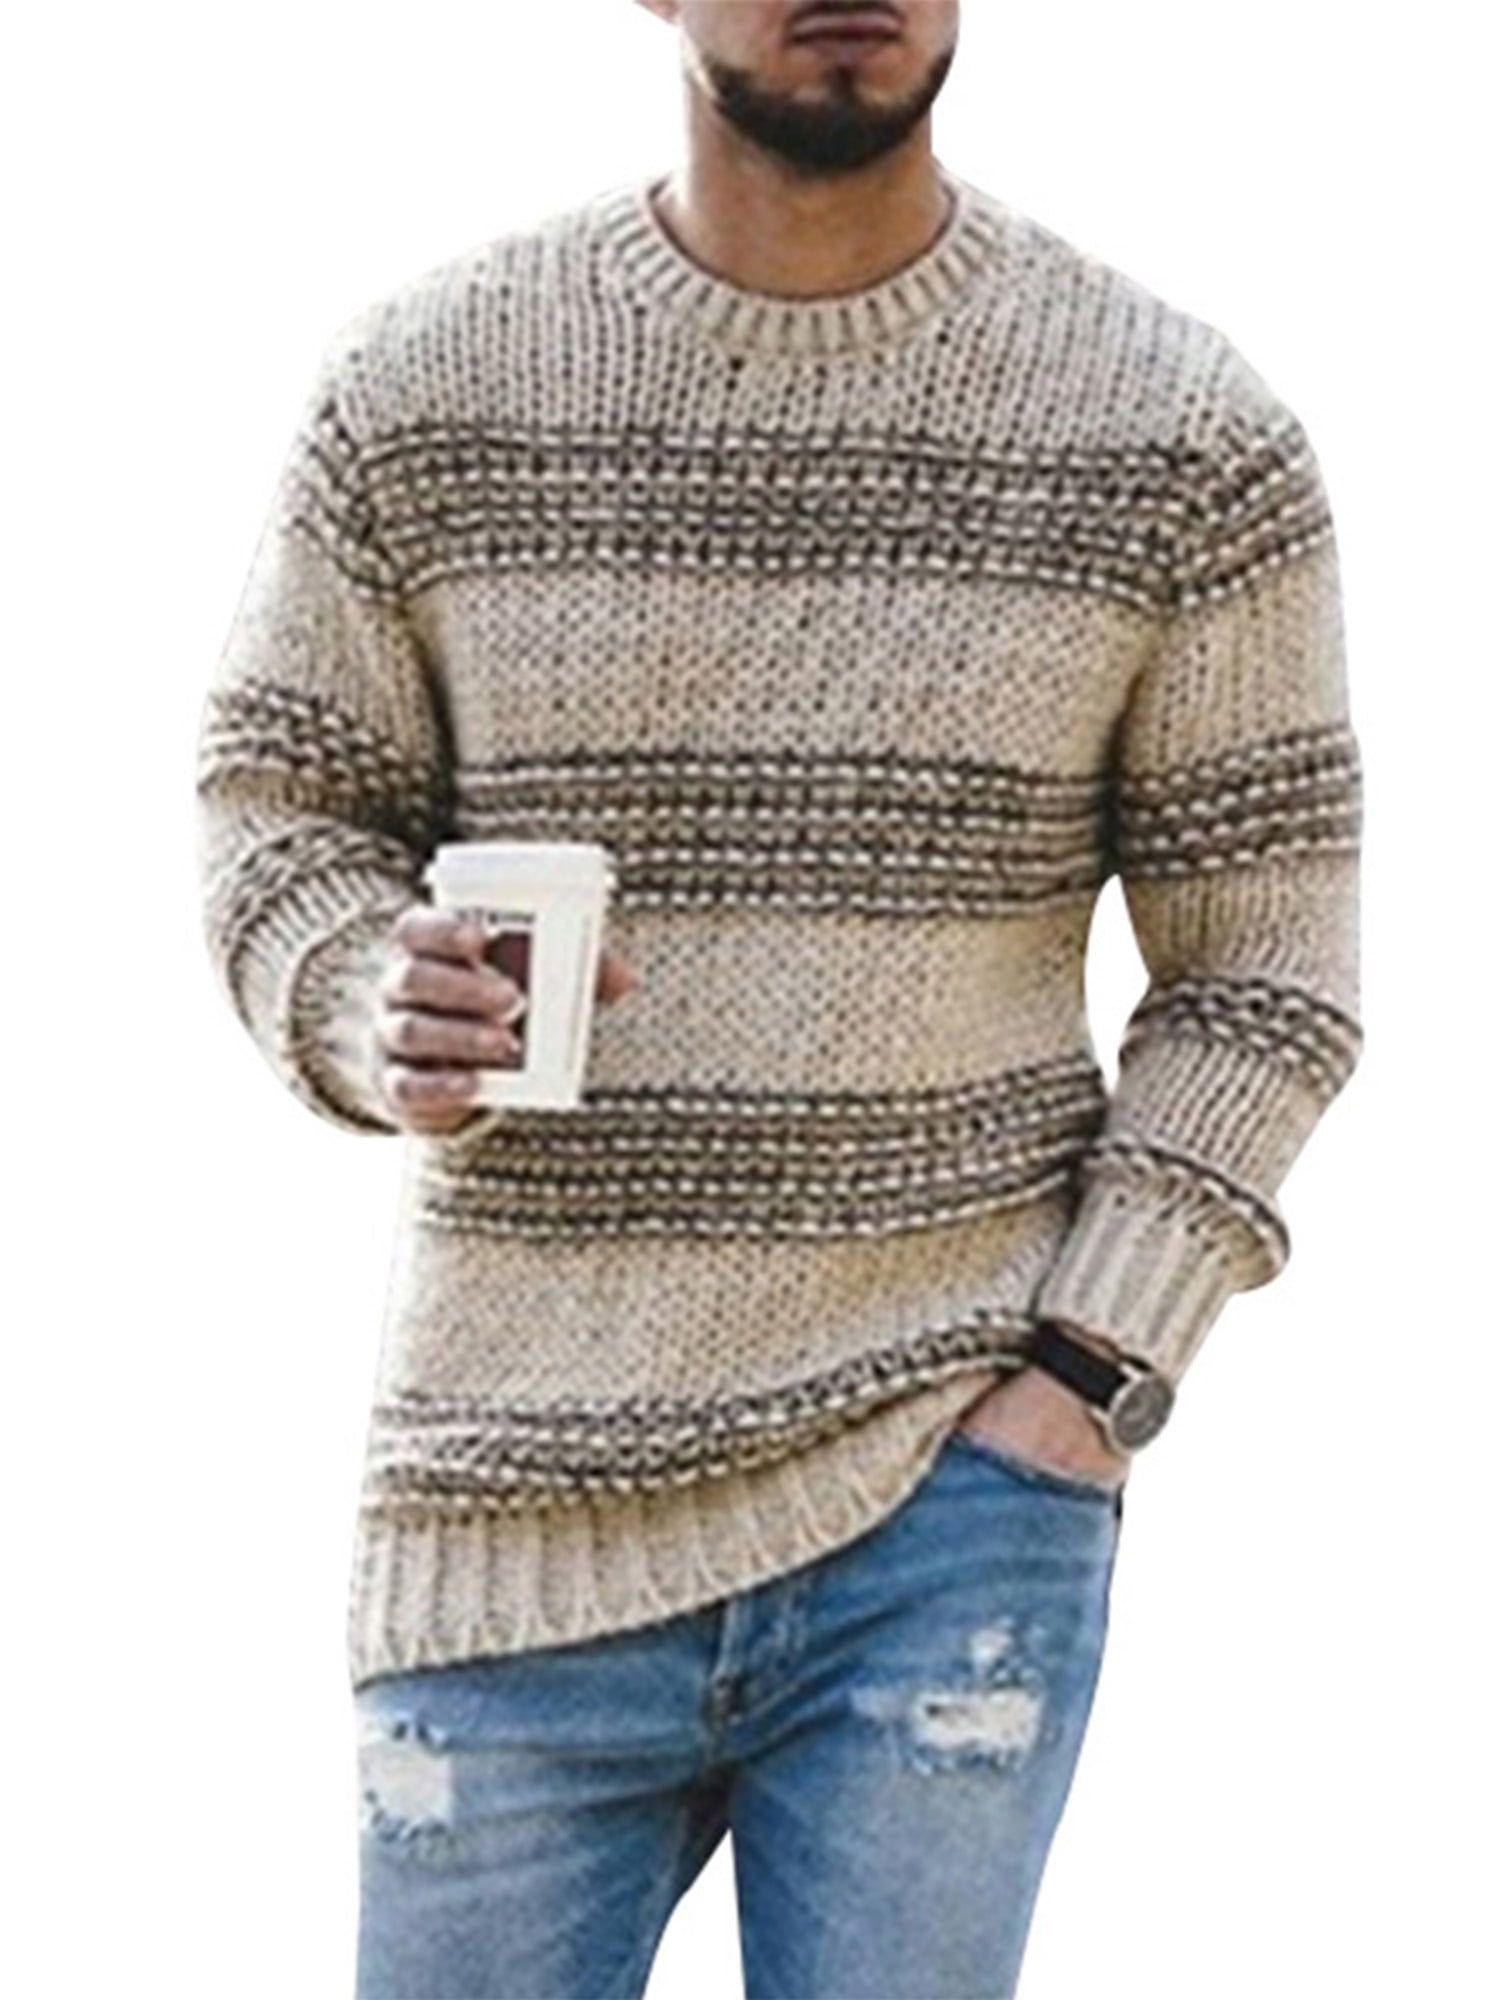 Men Sweater Hooded Warm Casual Slim Fit Solid Color Knitted Pullover Sweater Tee 